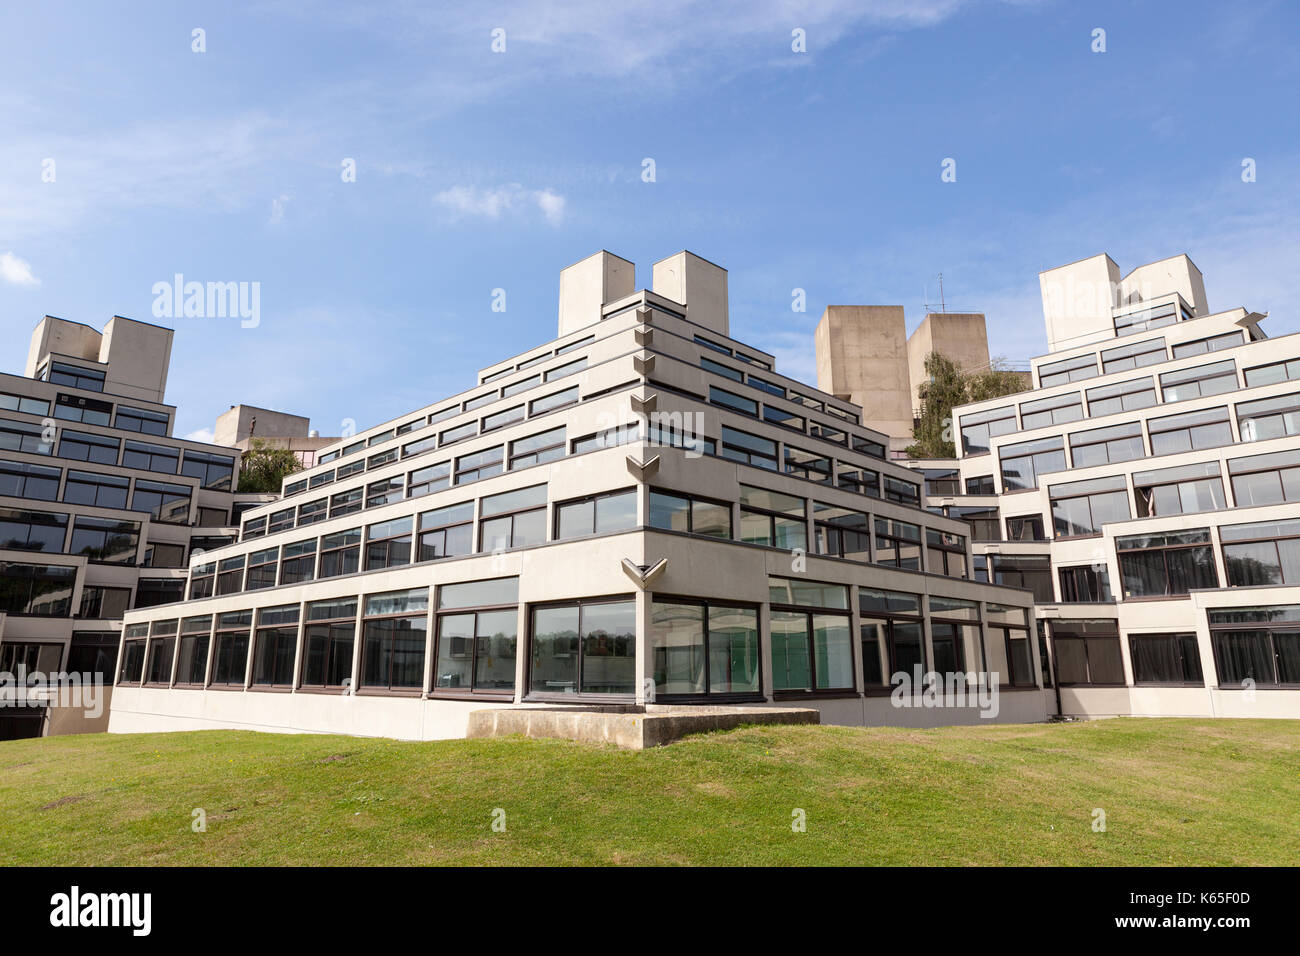 A students' residential block, designed by Denys Lasdun, one of many on the campus at the University of East Anglia, Norwich, UK. Stock Photo